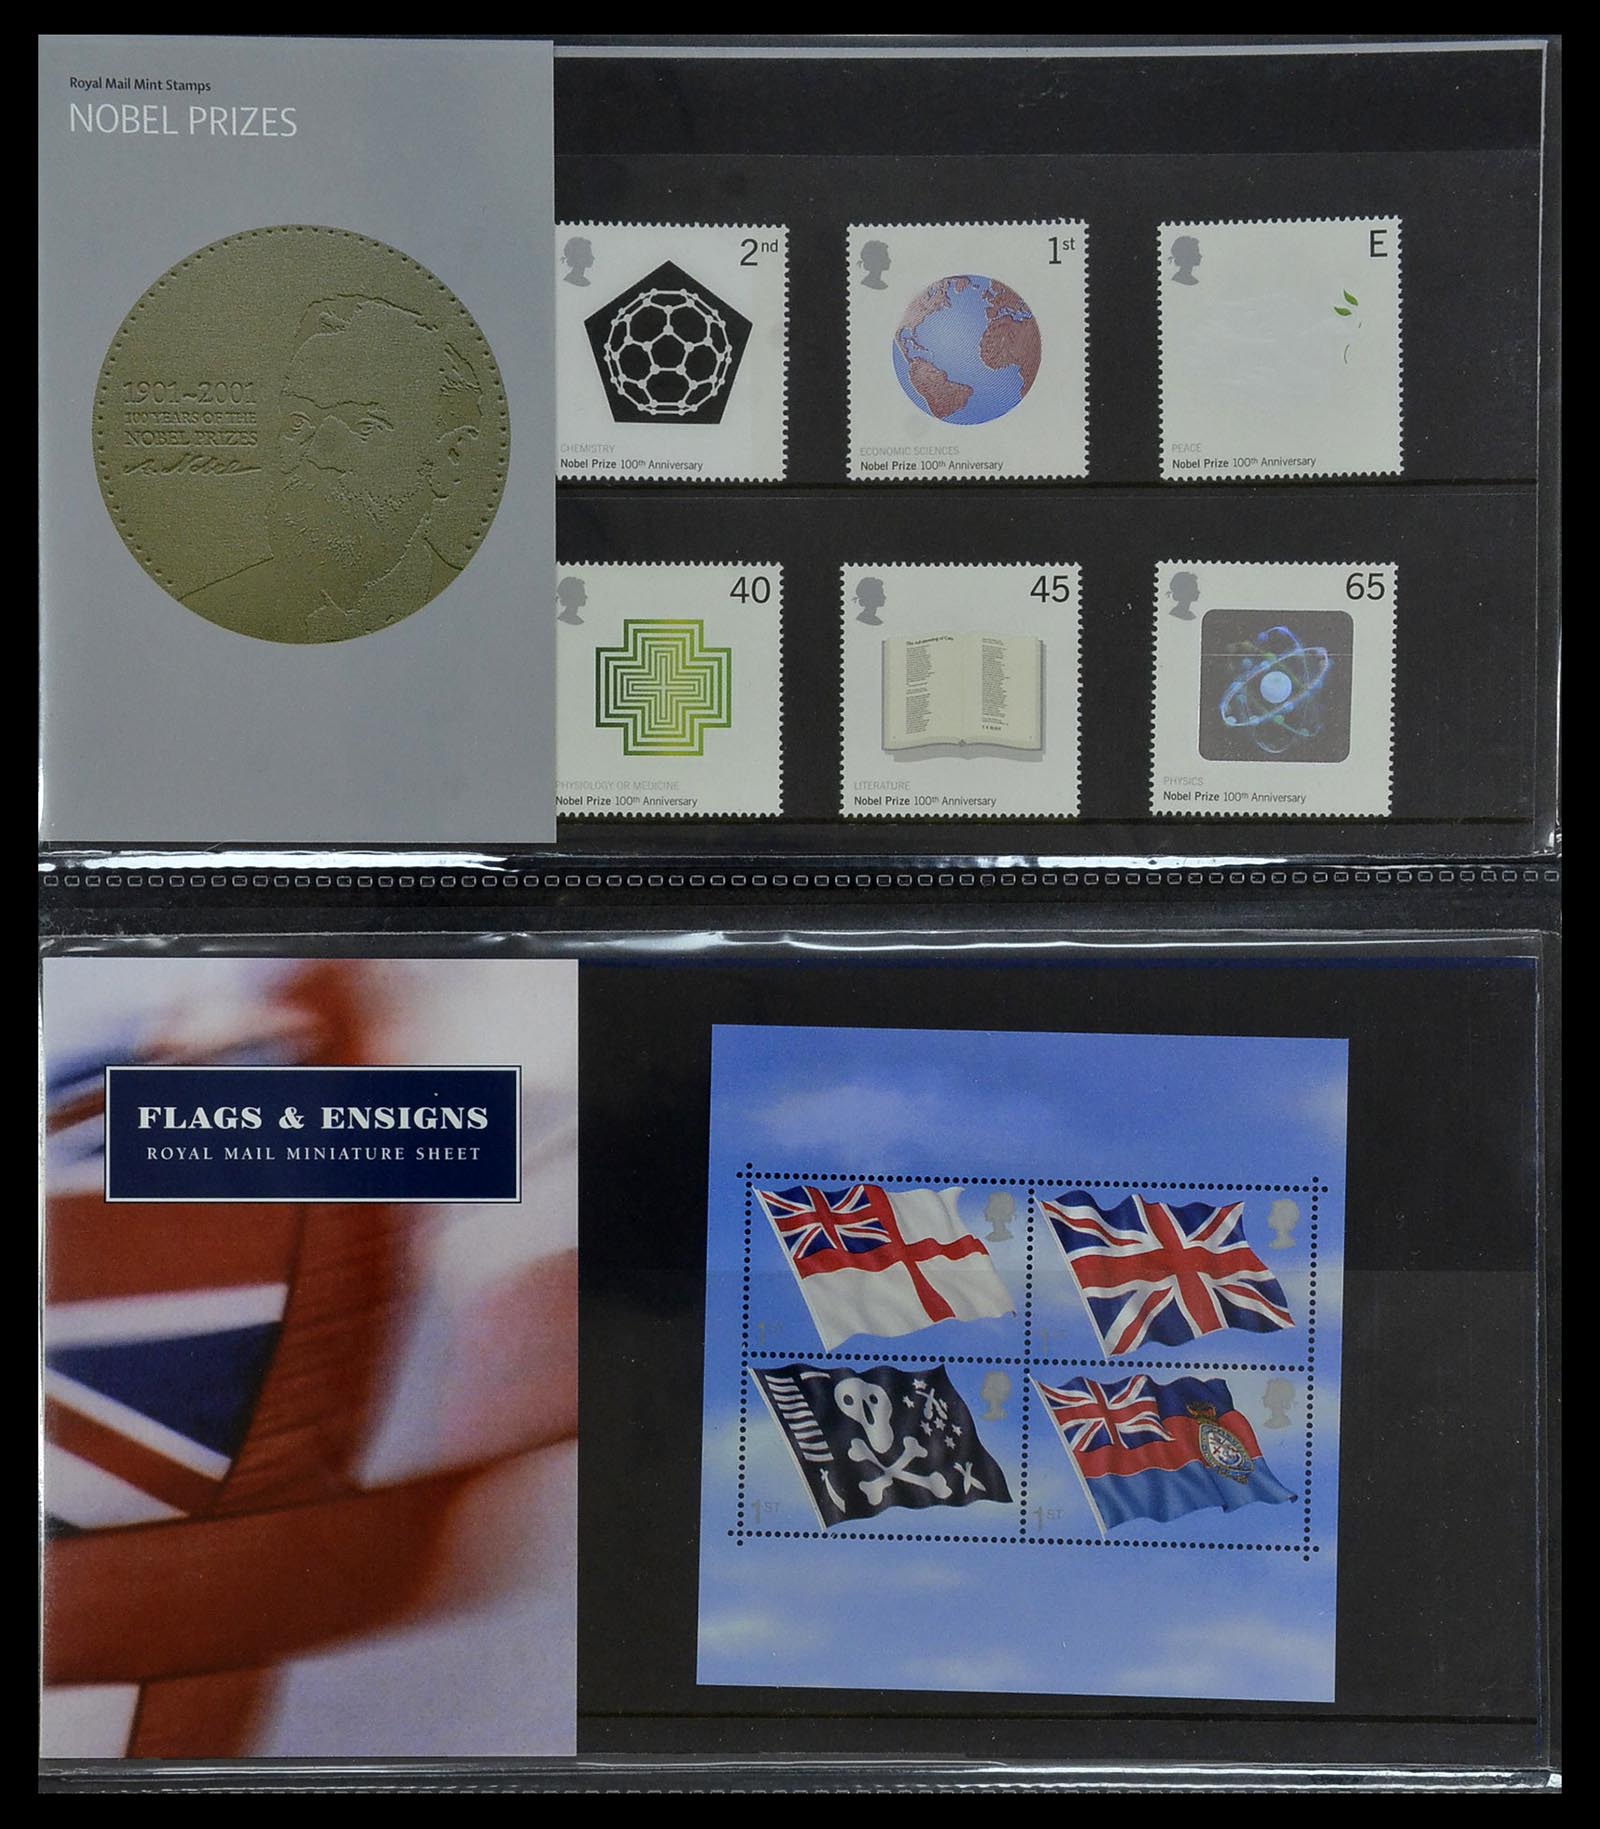 34029 115 - Stamp collection 34029 Great Britain presentation packs 1978-2004.